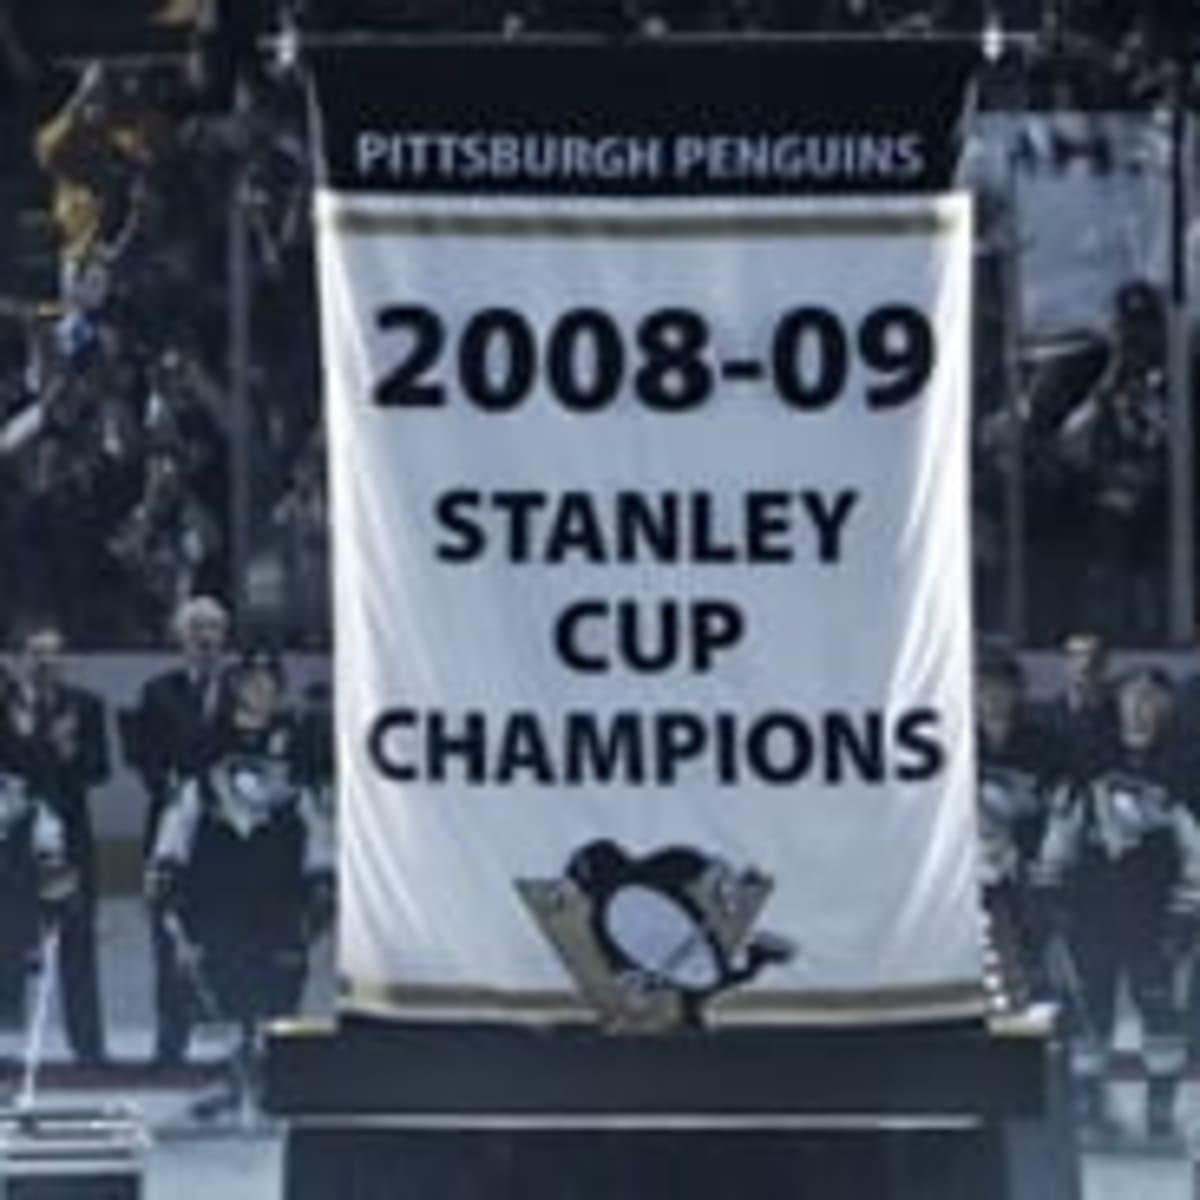 NHL Shop - The St. Louis Blues raised their Stanley Cup banner